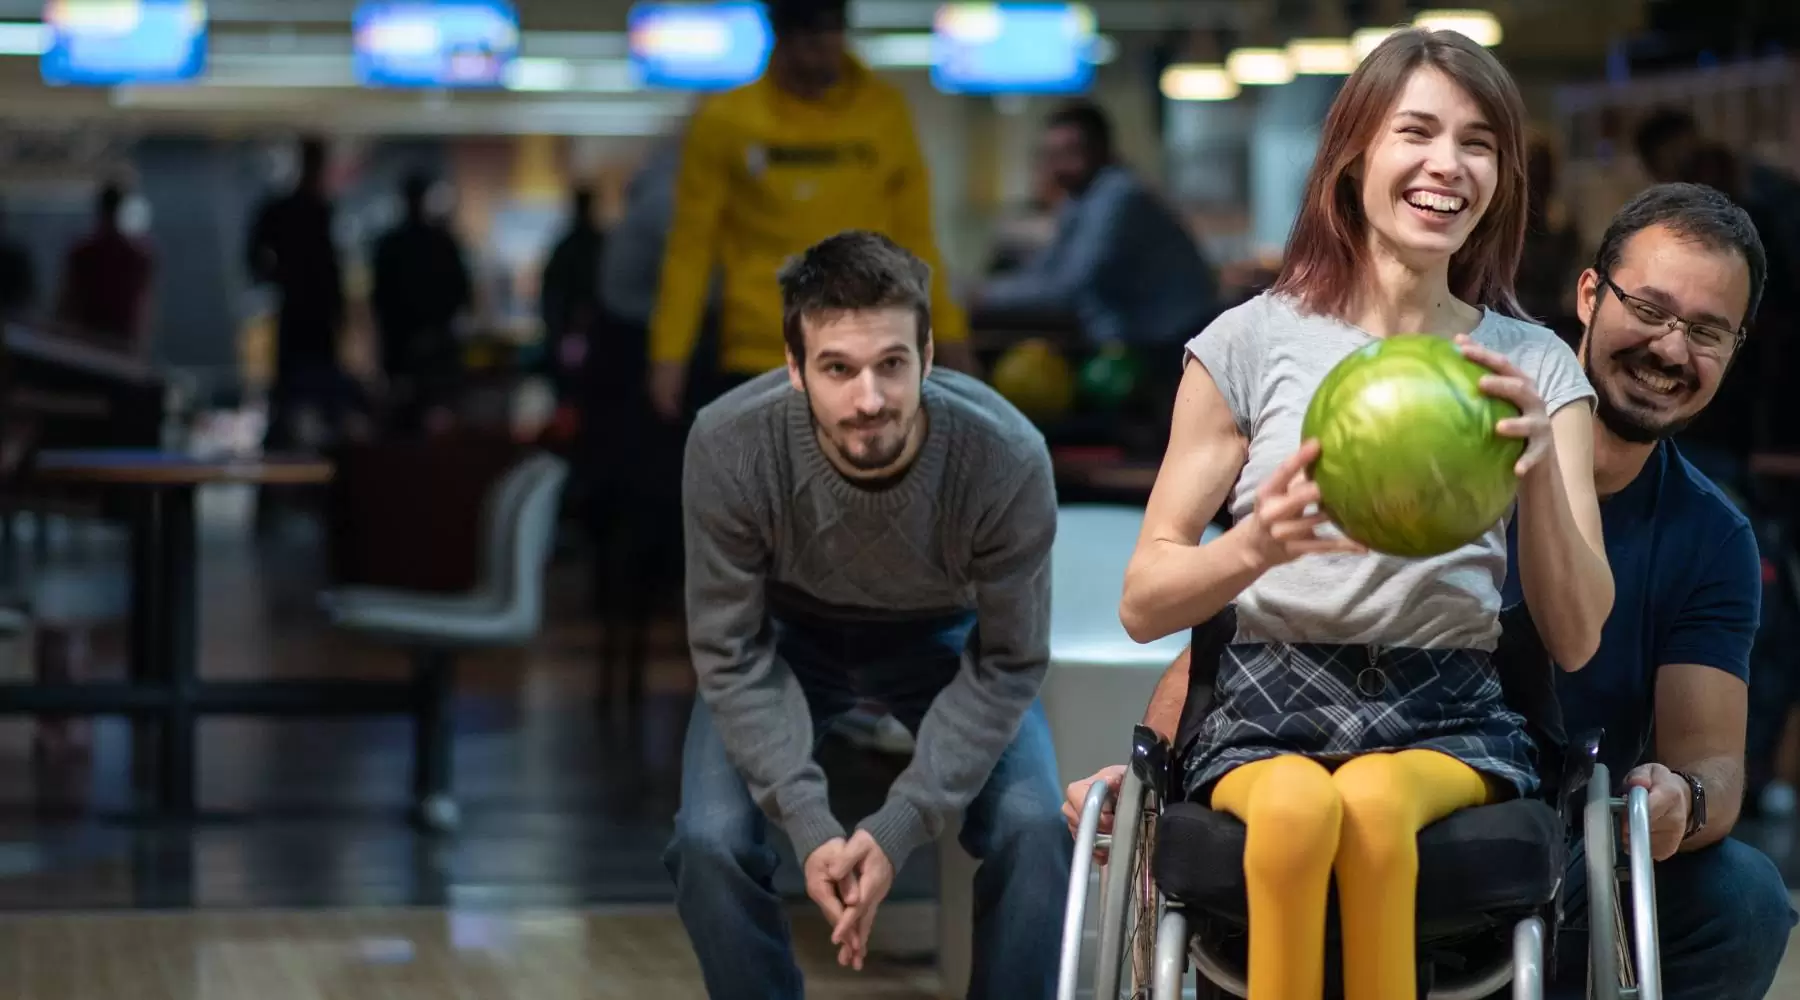 Woman in a wheelchair bowling with friends